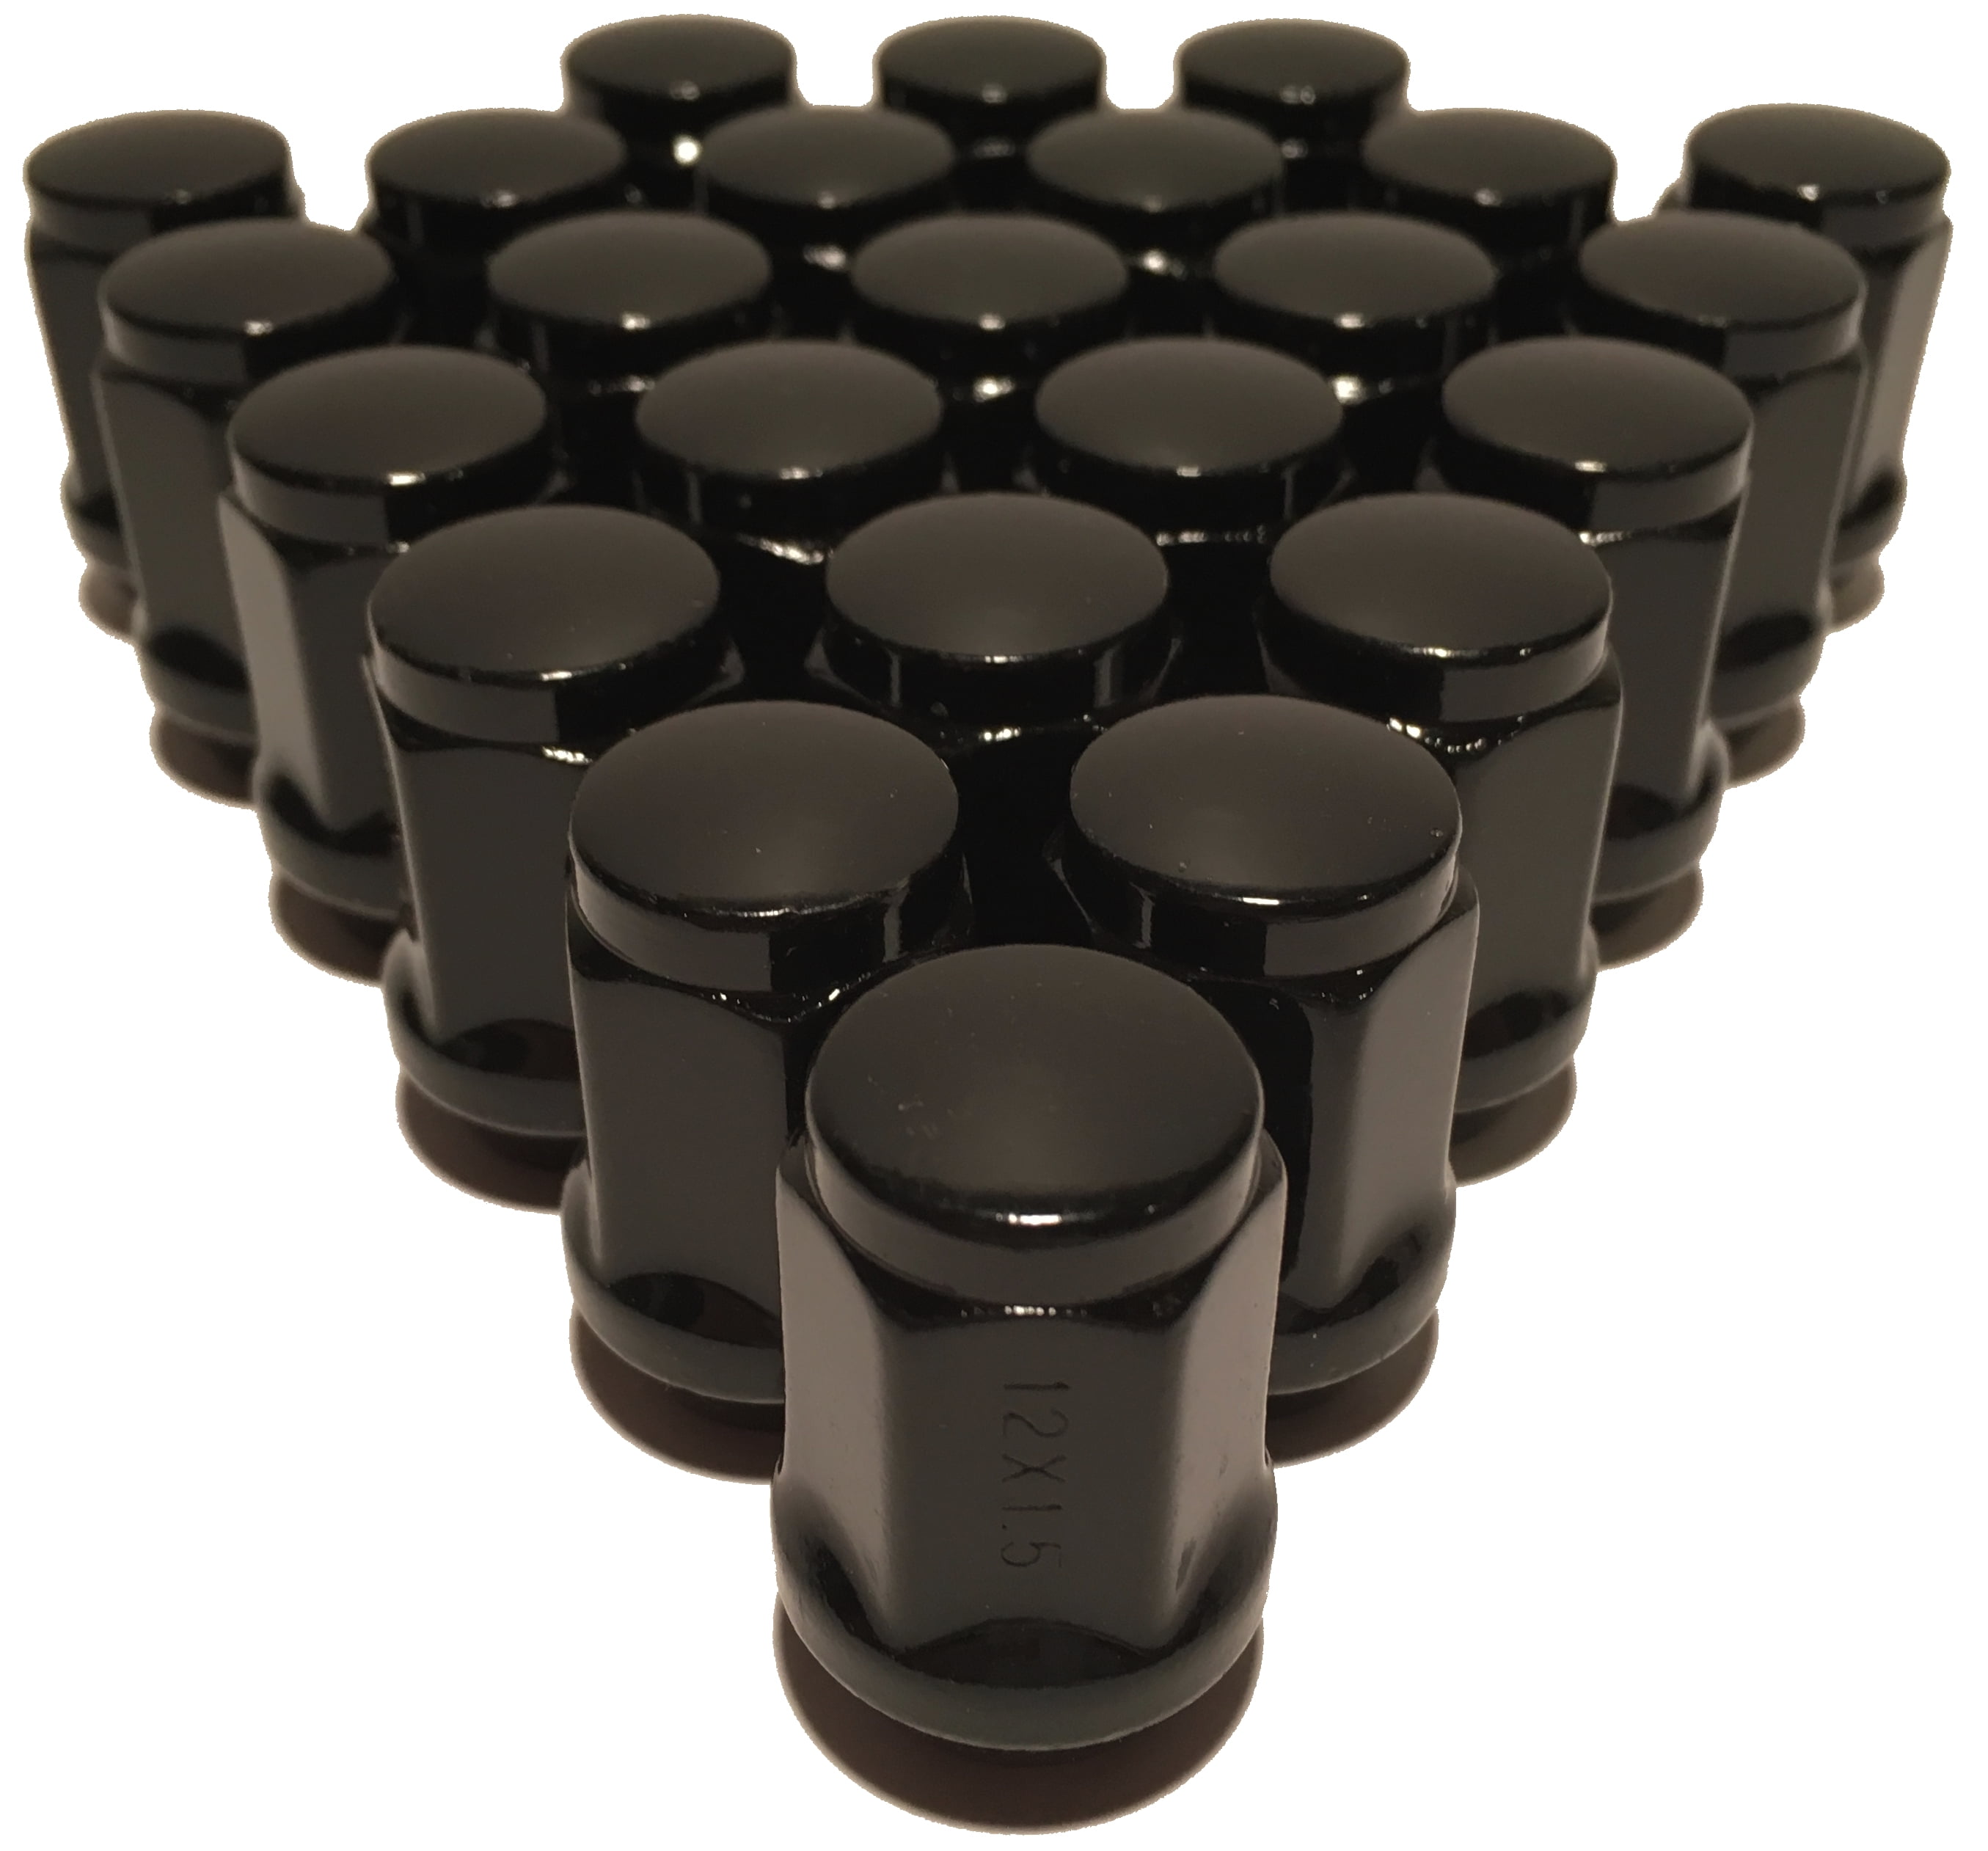 Compatible with Various Chevy Chevrolet GMC Ford 8-Lug Trucks SUVs Vehicles 3/4 19mm Hex StanceMagic 32pcs Black 14x1.5 Bulge Closed End Lug Nuts 1.8 inch Length Cone Acorn Seat 